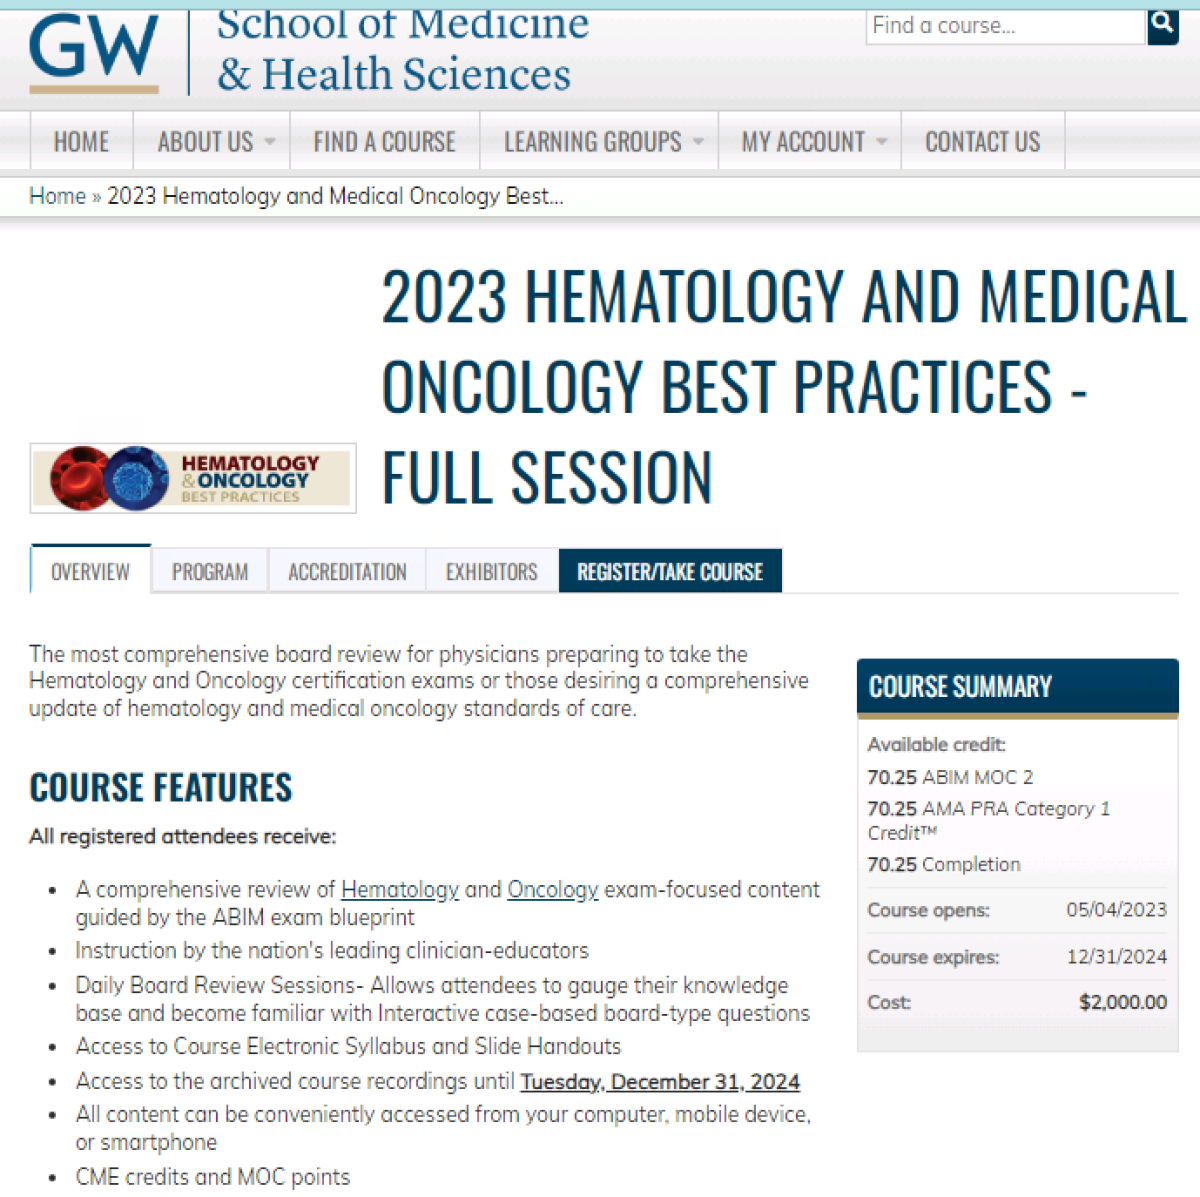 2023 HEMATOLOGY AND MEDICAL ONCOLOGY BEST PRACTICES – FULL SESSION